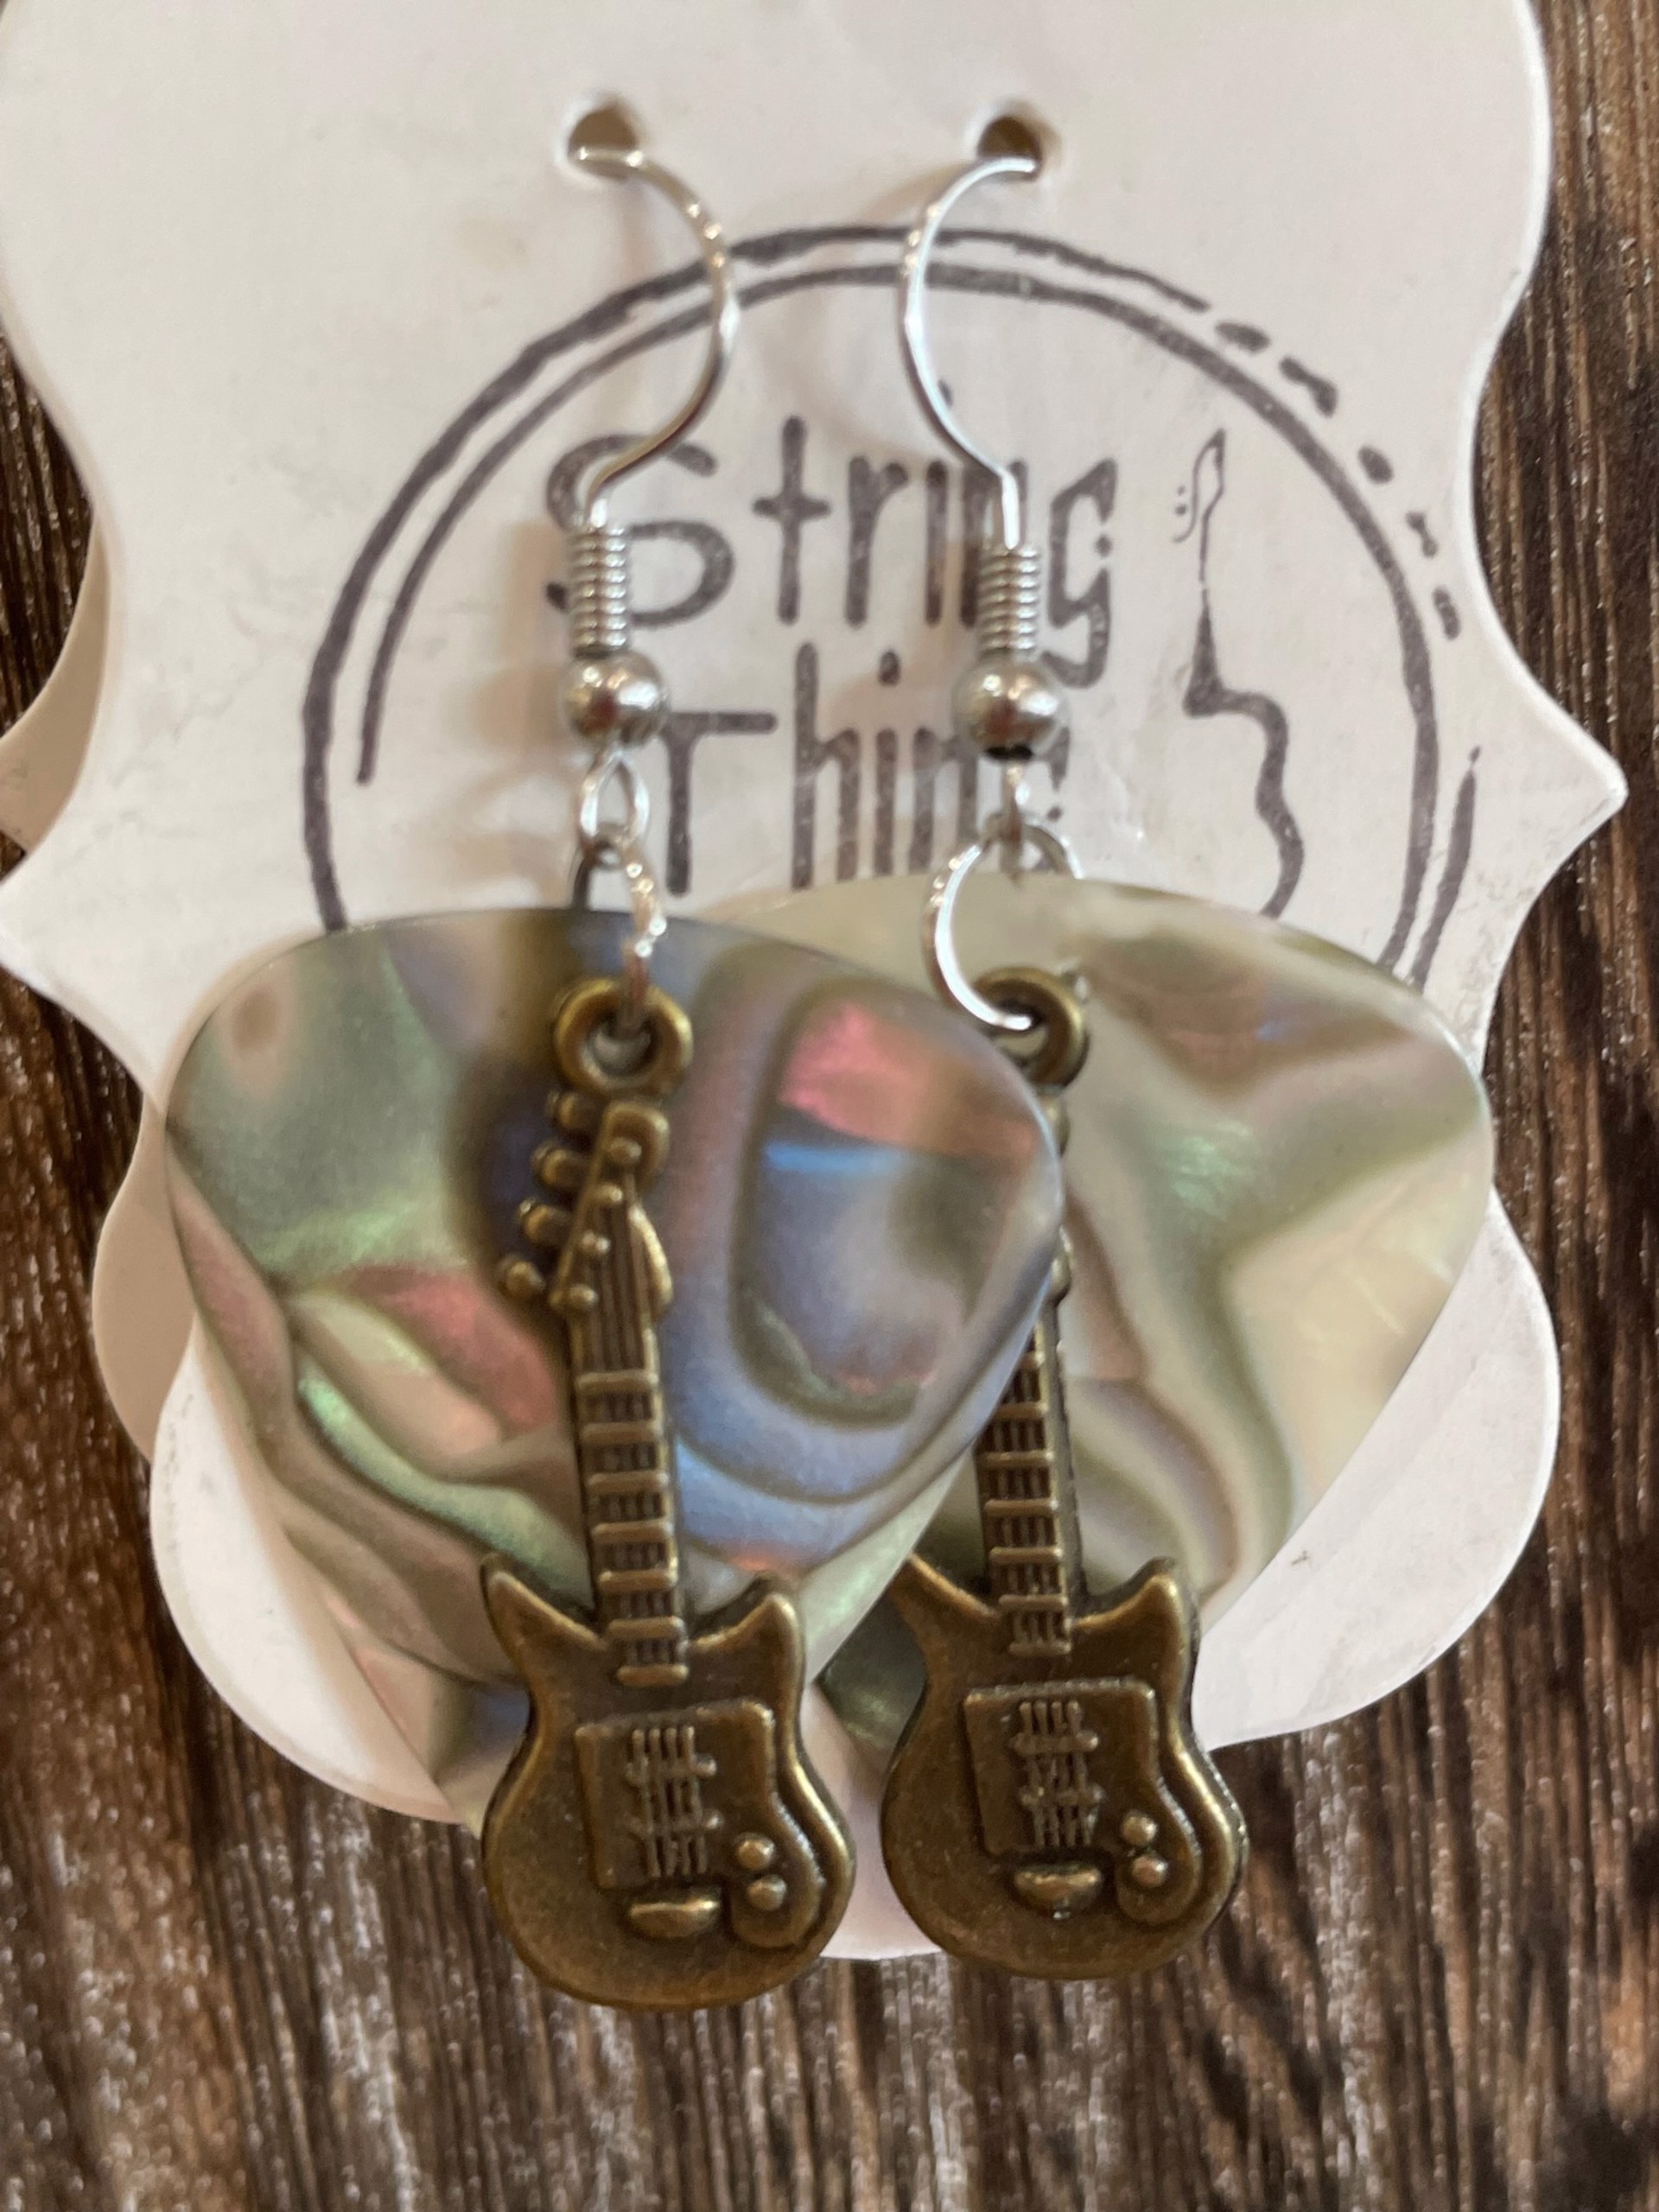 Antique Guitar and Pearl Pick Earrings by String Thing Designs